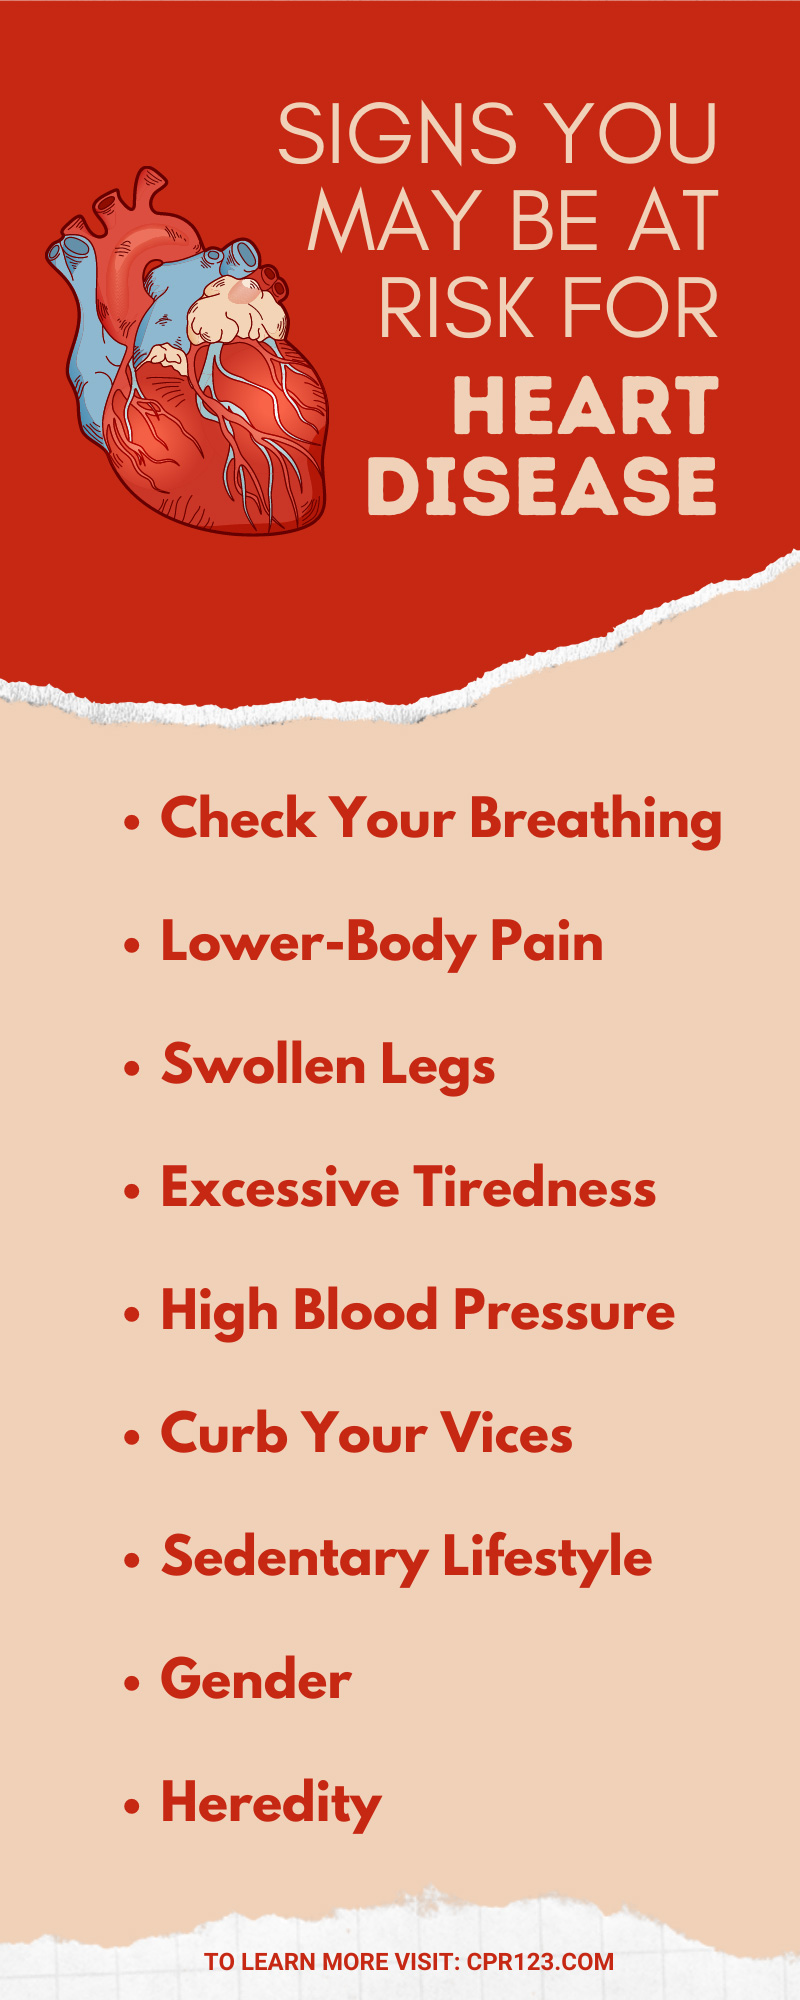 Signs You May Be at Risk for Heart Disease